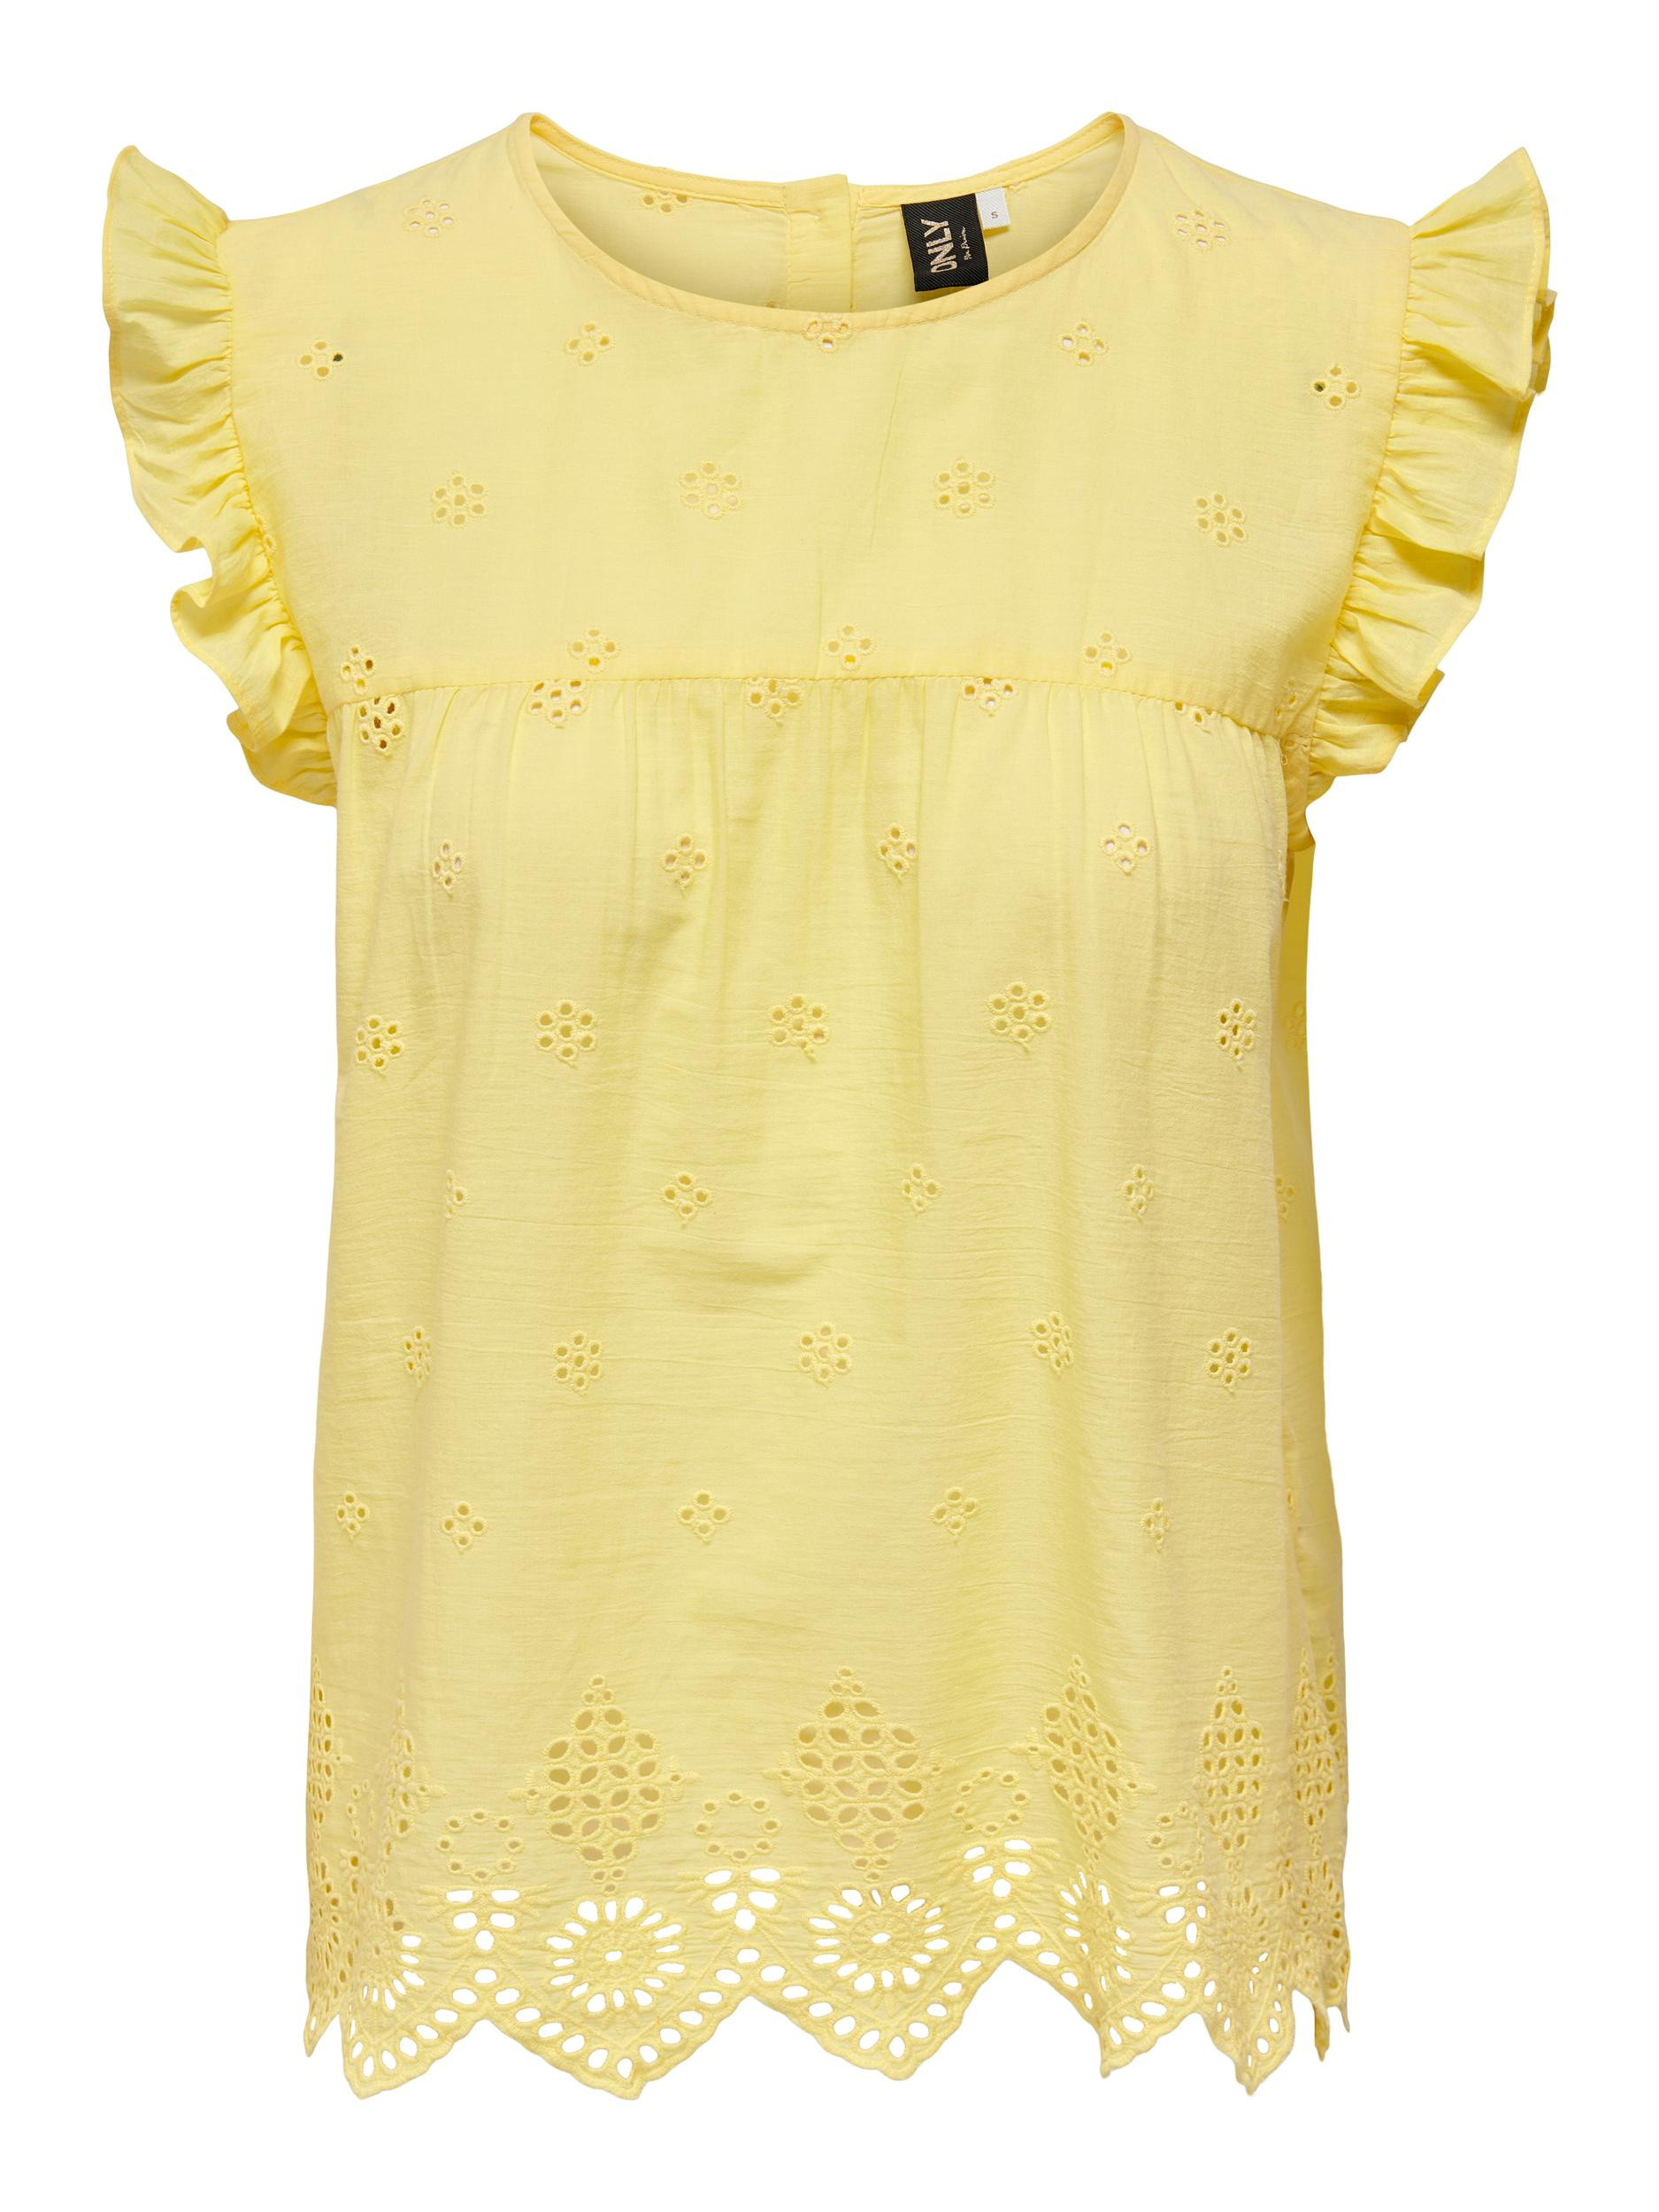 Only - Cotton top, Yellow, large image number 0